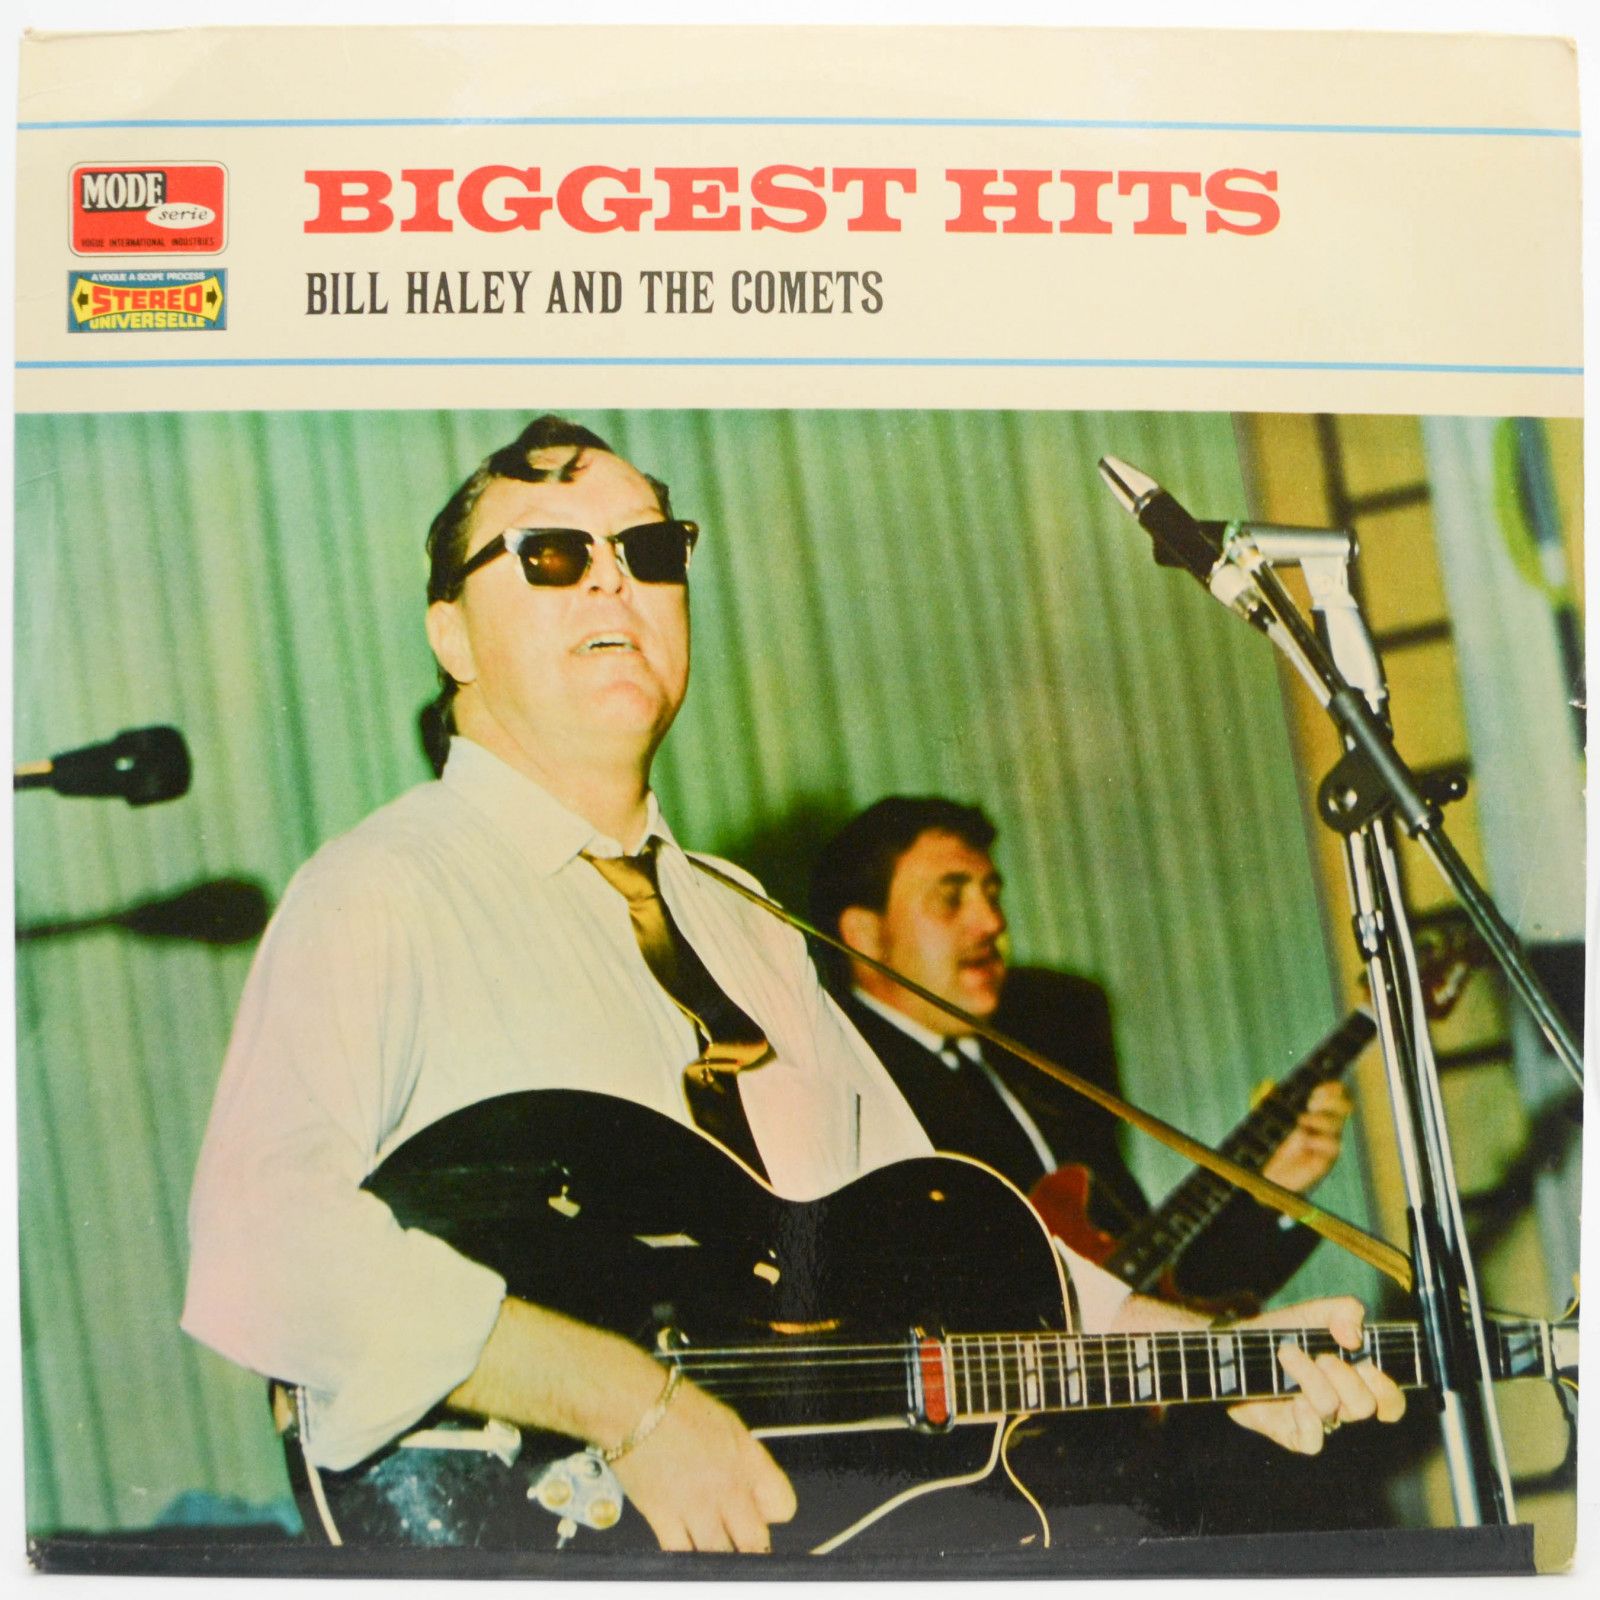 Bill Haley And The Comets — Biggest Hits, 1968